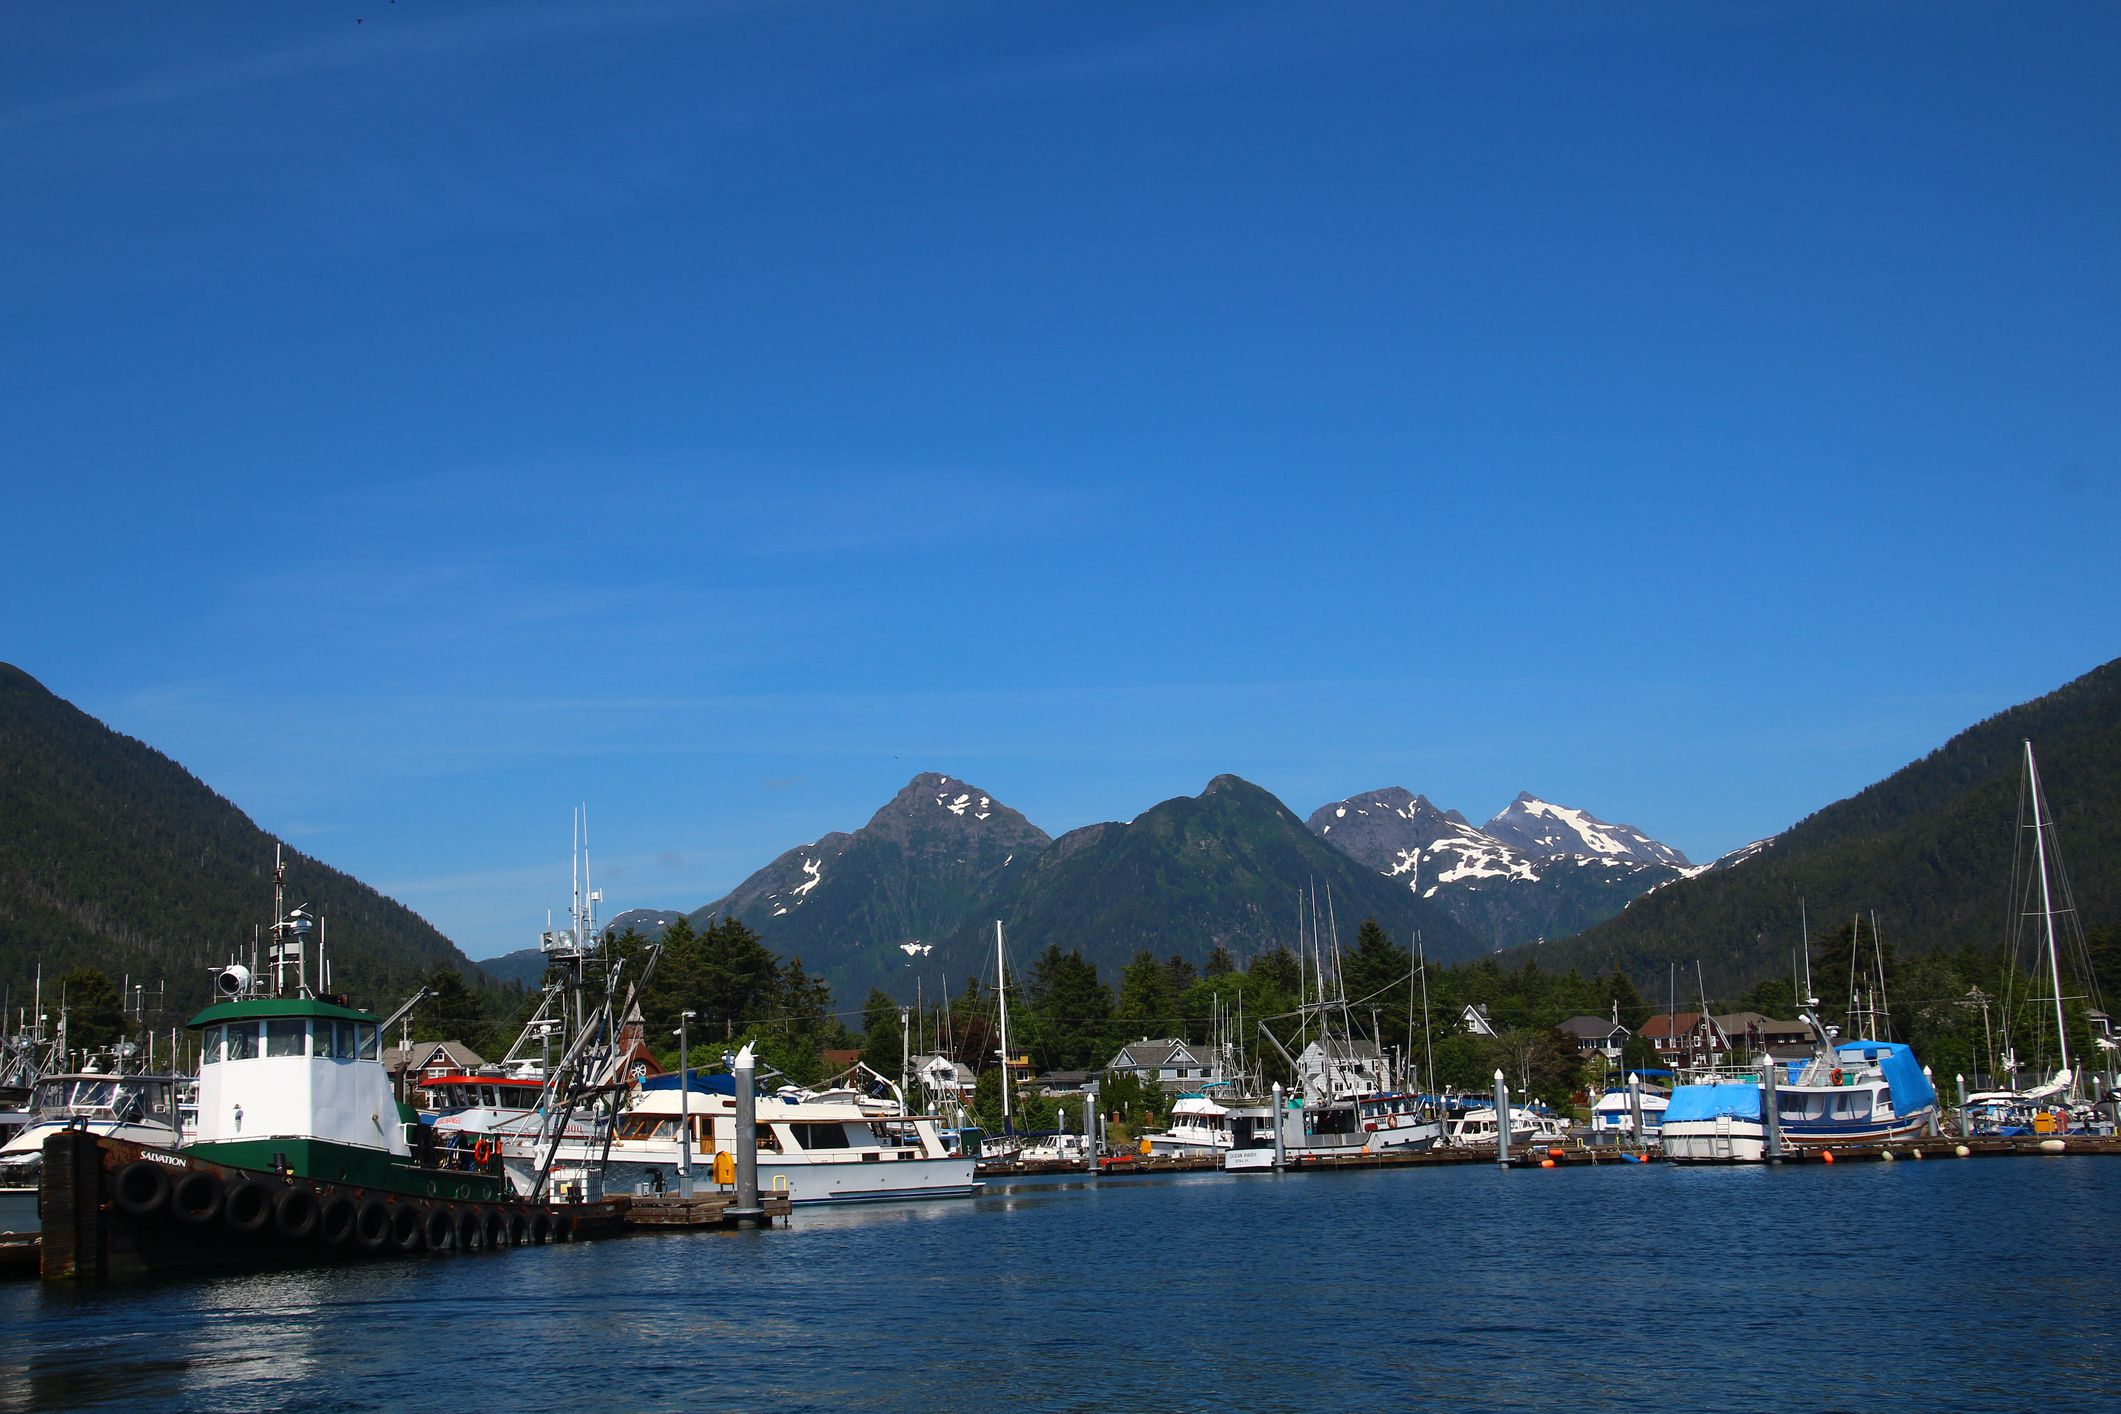 <p>Unless you’re a commercial fisher, jobs may be harder to come by in Sitka than they are in Juneau. That said, if you have a remote job, Sitka should certainly be on your personal list of the best places to live in Alaska for families. It’s affordable and offers plenty of outdoor activities to keep kids immersed in nature — and the weather tends to be a little less harsh than cities and villages within the Inside Passage.</p><ul><li>Population: 8,382</li><li>Median Household Income: $82,083</li><li>Cost of Living: 133% of U.S. average</li><li>Median Rent Price: $1,232</li><li>Home Price-to-Income Ratio: 4.48</li><li>Average Property Tax: 0.53%</li></ul><p class="padding-top-ms u-margin-bottom-ms"><b>Housing Affordability:</b> Rent in Sitka is more affordable than Juneau, but houses are actually slightly more expensive. To afford the near $368K median home price, you’ll likely need a high-paying remote job to move your family to Sitka.</p>